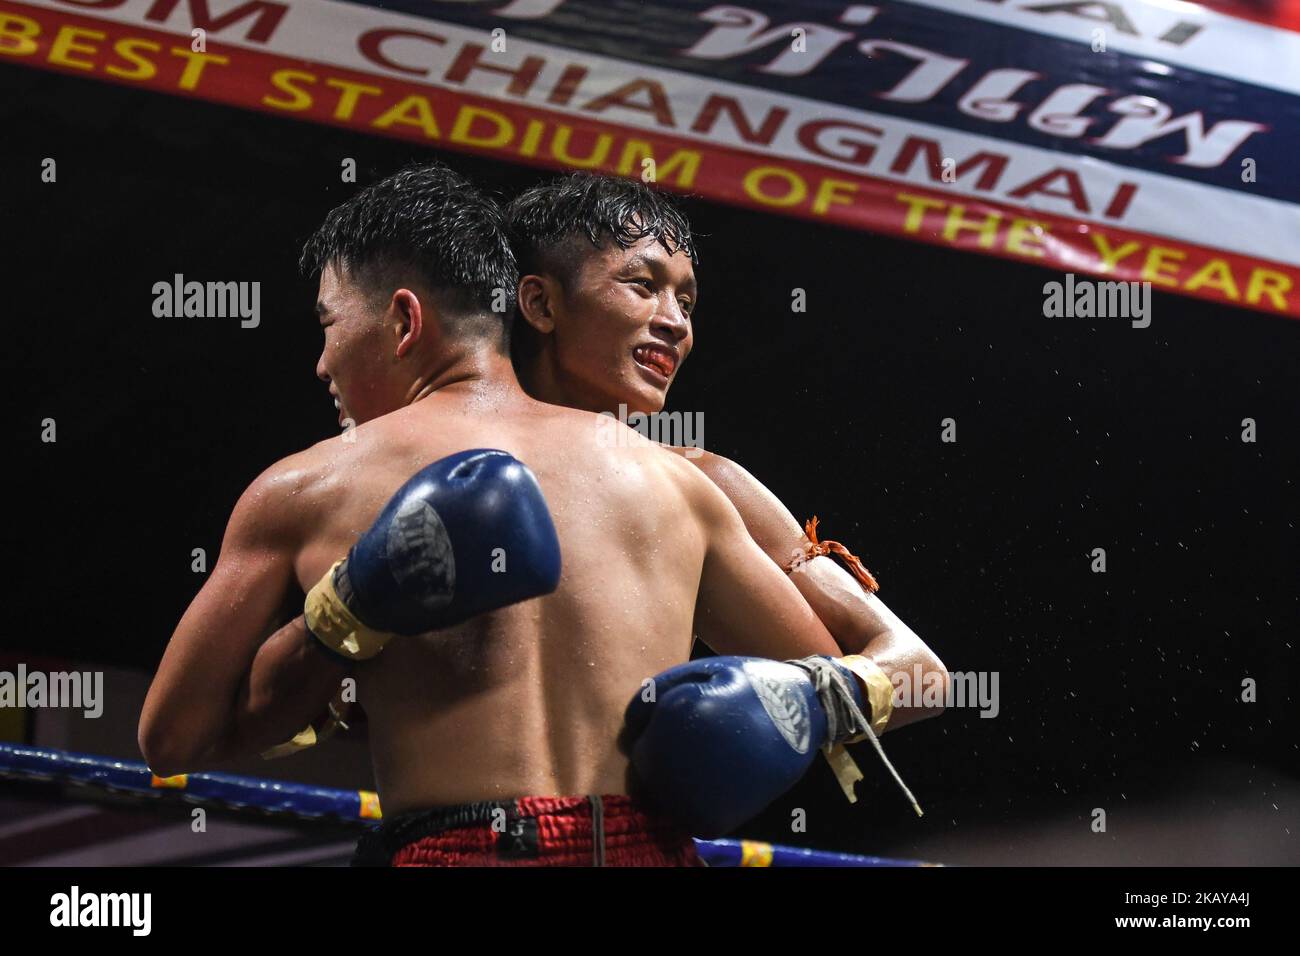 Tulek (THAILAND - Blue) wins his Thai boxing international combat against Aahuang Sitwungluang (CHINA - Red), in -60kg category, during Muaythai Monday Evening International Thai Boxing Gala in Thaphae Stadium in Chiang Mai. On Monday, June 11, 2018, Chiang Mai, Chiang Mai Province, Thailand. (Photo by Artur Widak/NurPhoto)  Stock Photo